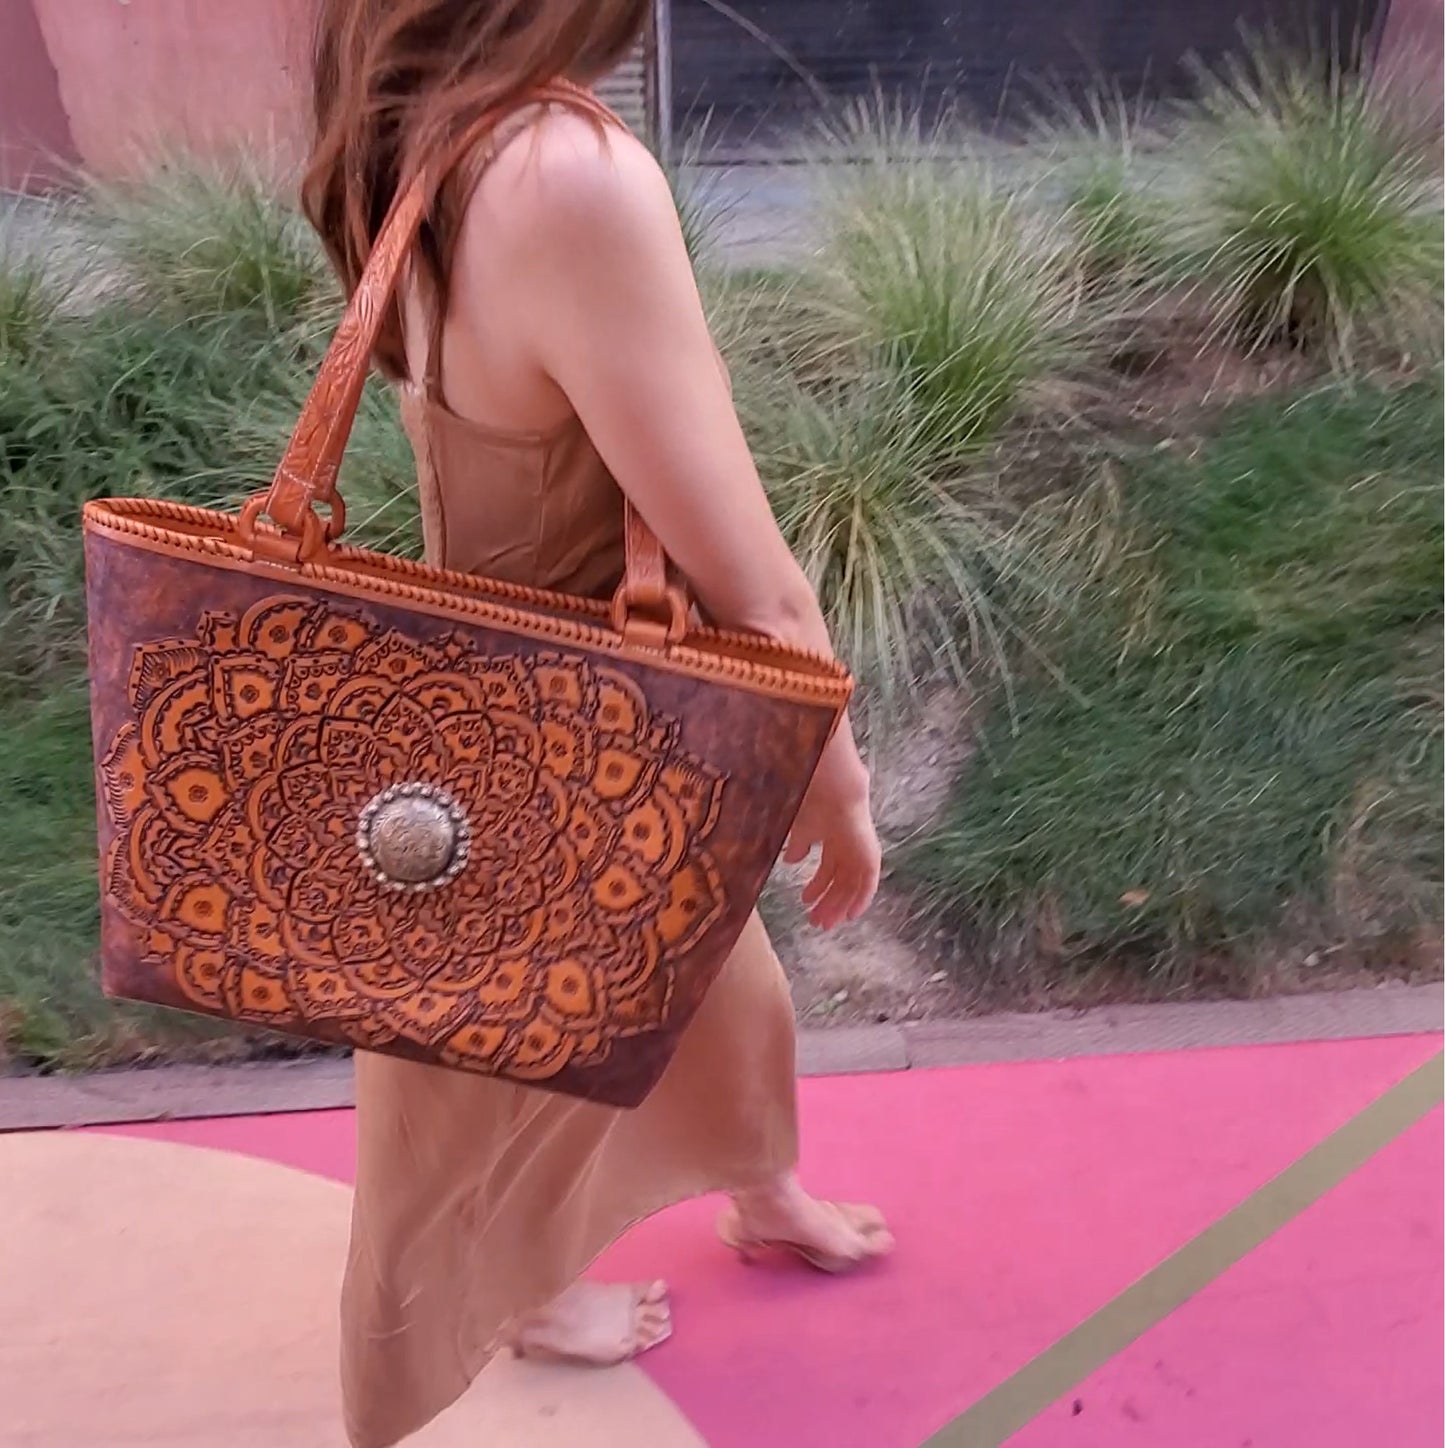 Hand Made Leather Tote Bag "MIA" by MIOHERMOSA Honey Mia Mayan Sun Top